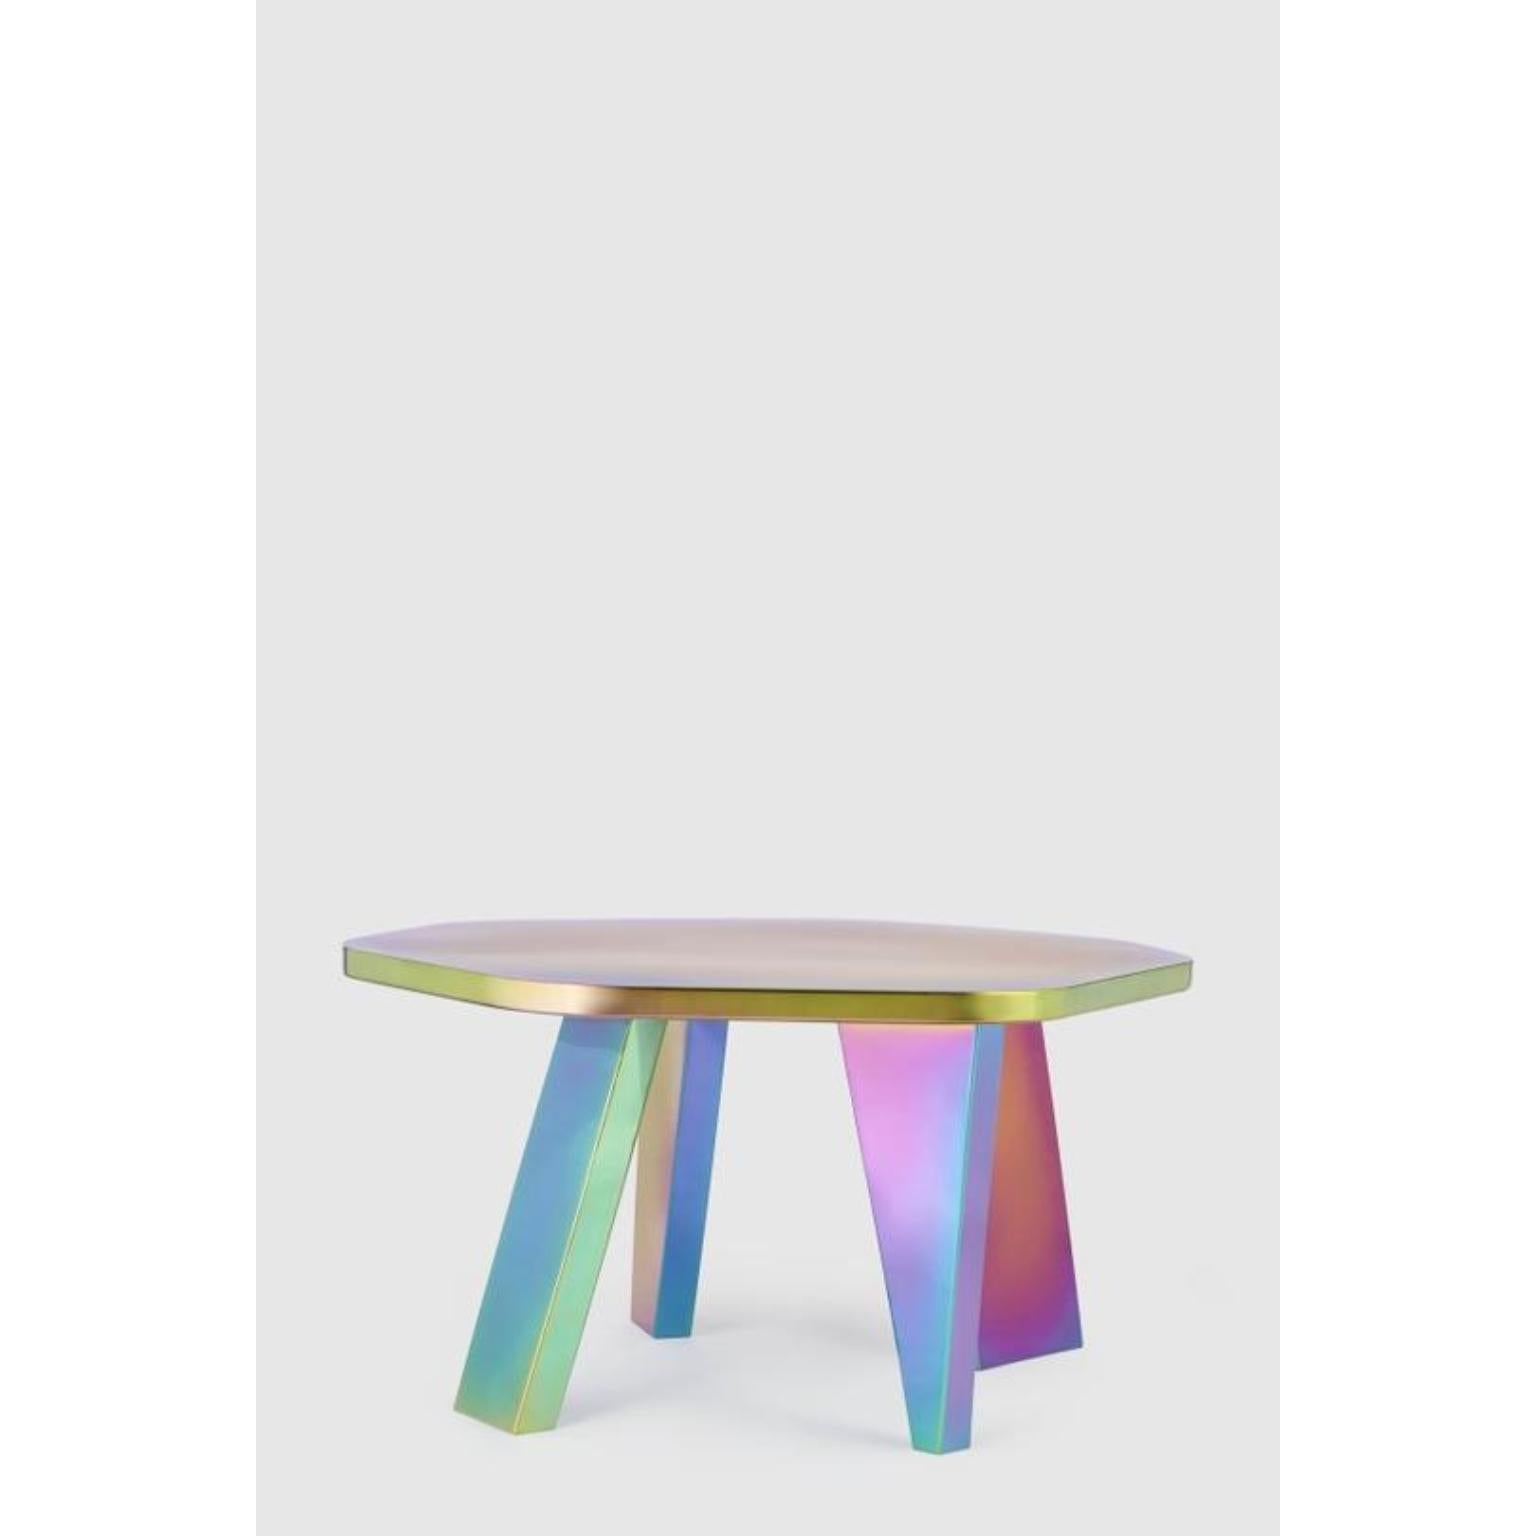 Unique small rainbow center table by Hatsu
Dimensions: D 96 x W 96 x H 50 cm 
Materials: Plated stainless steel 

Hatsu is a design studio based in Mumbai that creates modern lighting that are unique and immediately recognisable. We started with an